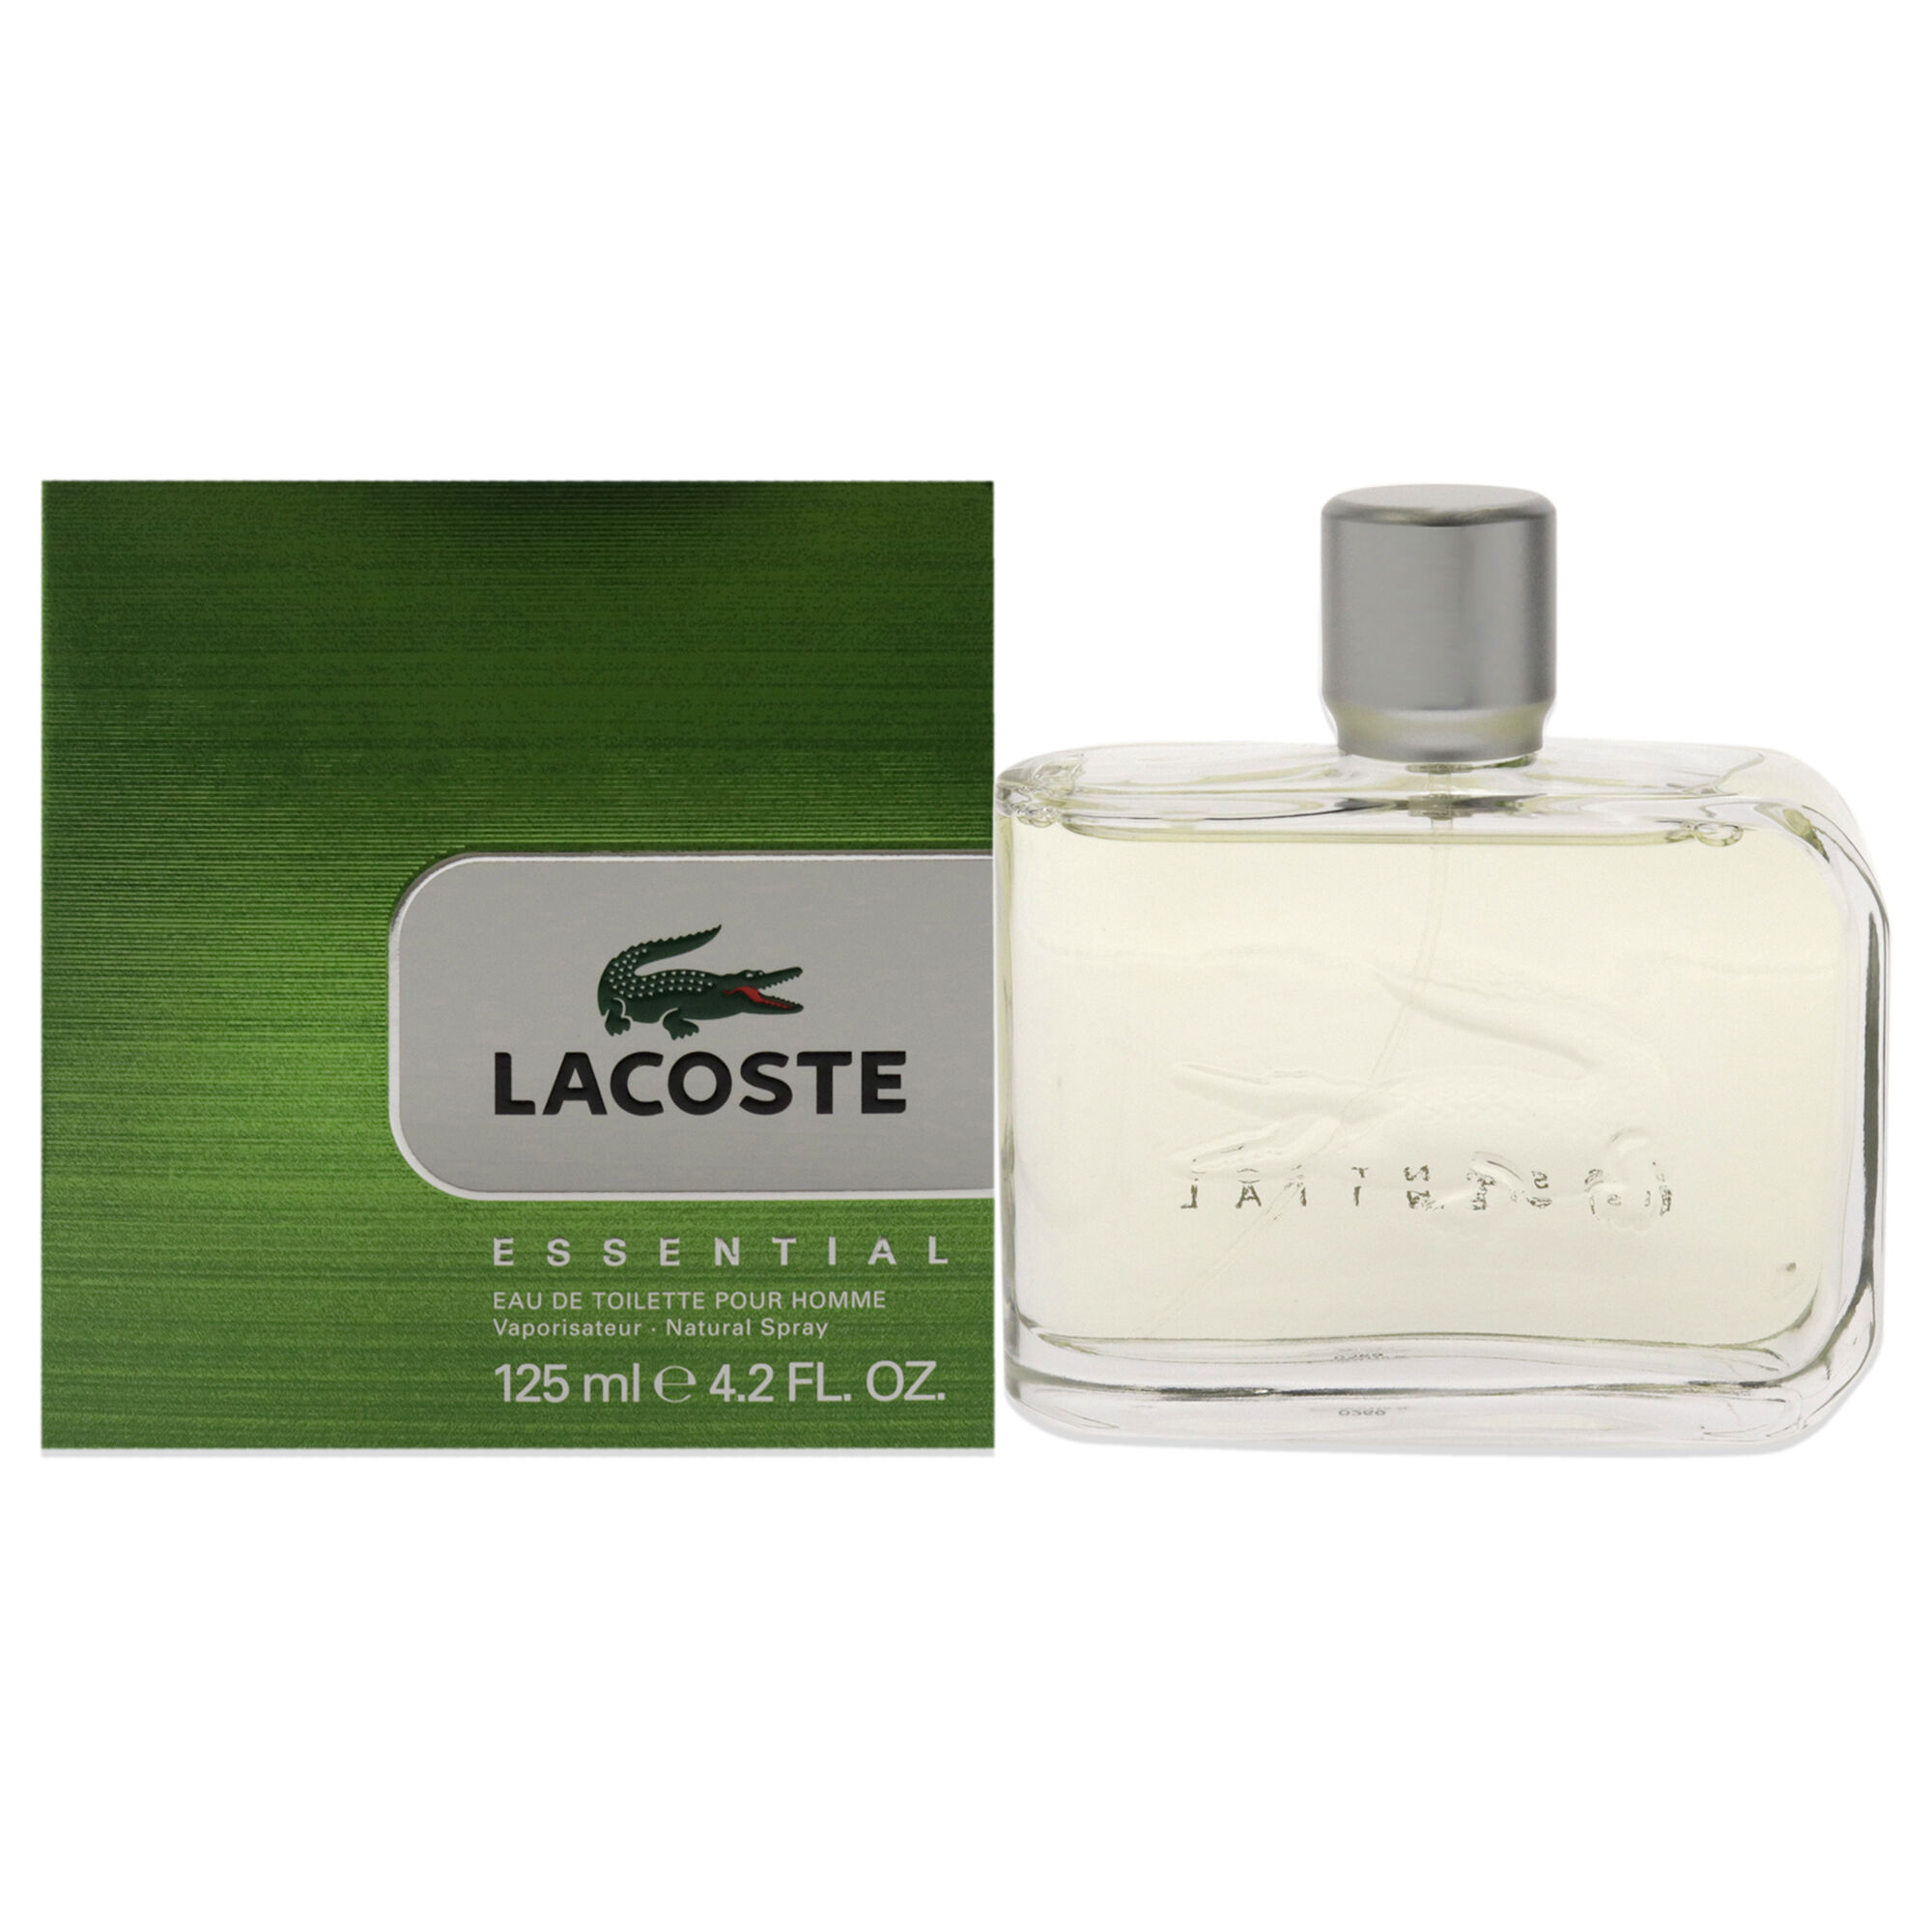 Lacoste by Lacoste for Men oz EDT Spray King Size